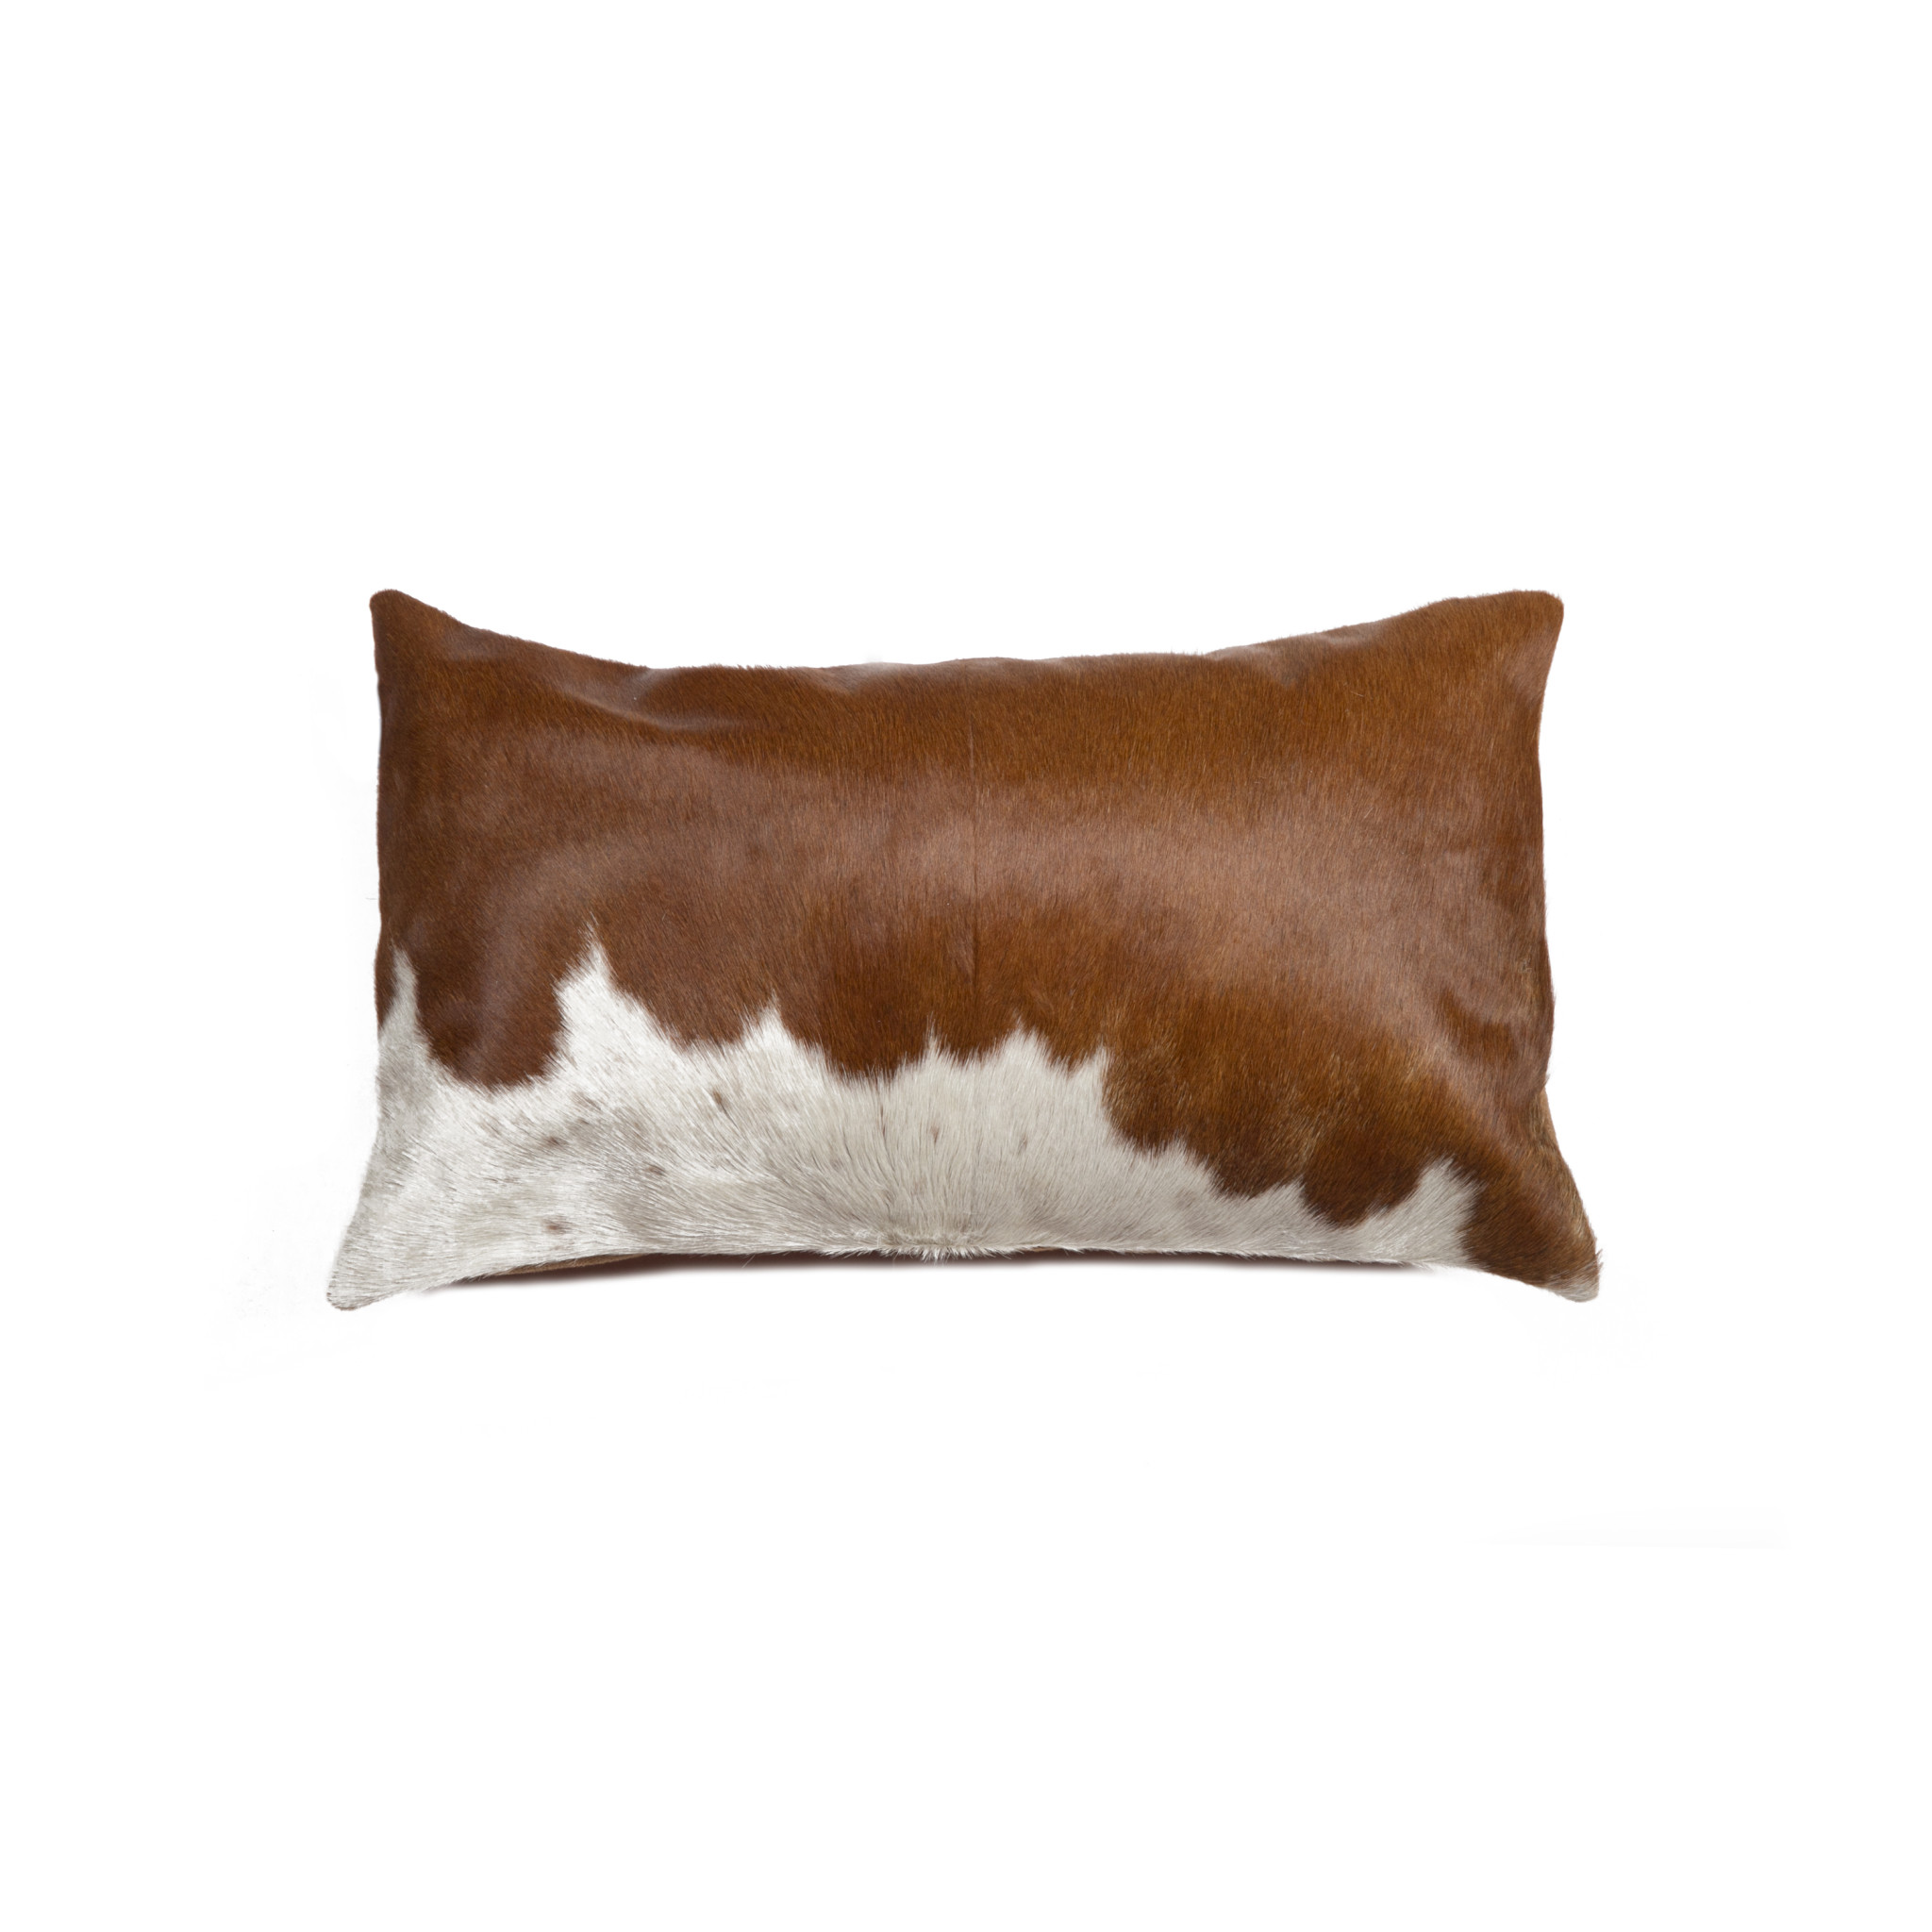 12" X 20" Brown and White Cowhide Throw Pillow-294273-1